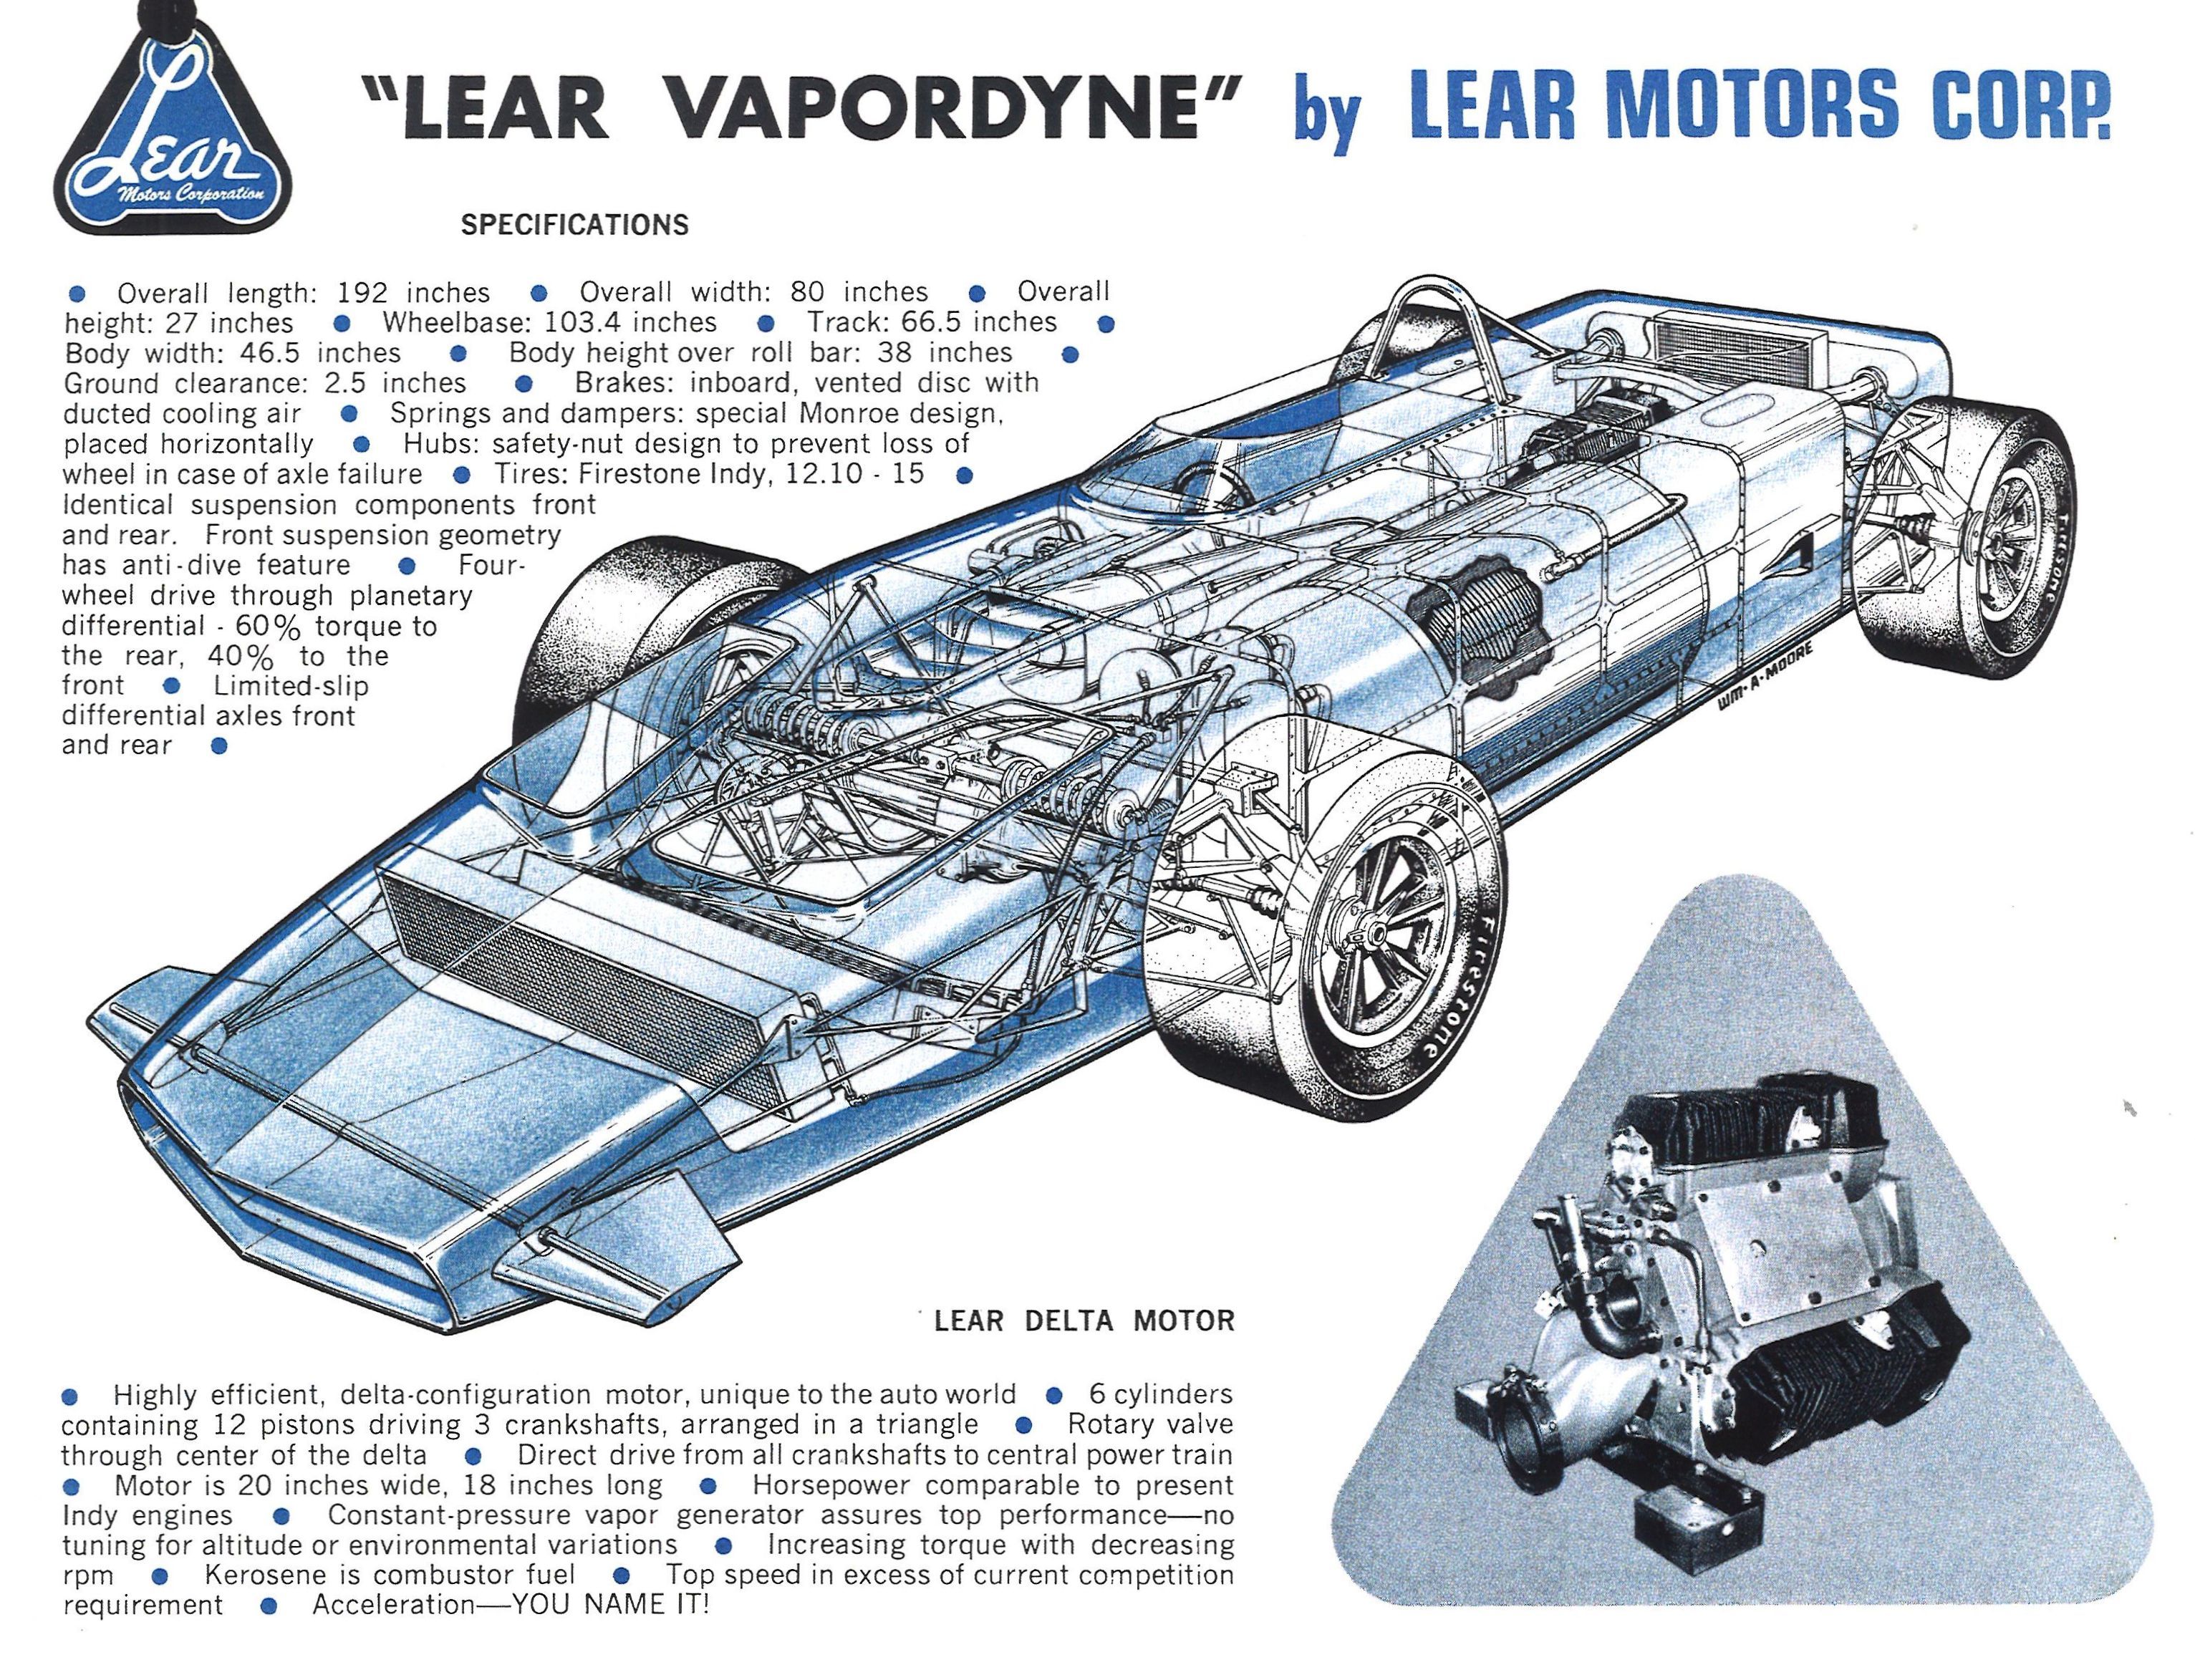 Was Bill Lear's steampowered Vapordyne more than Indyracer vaporware